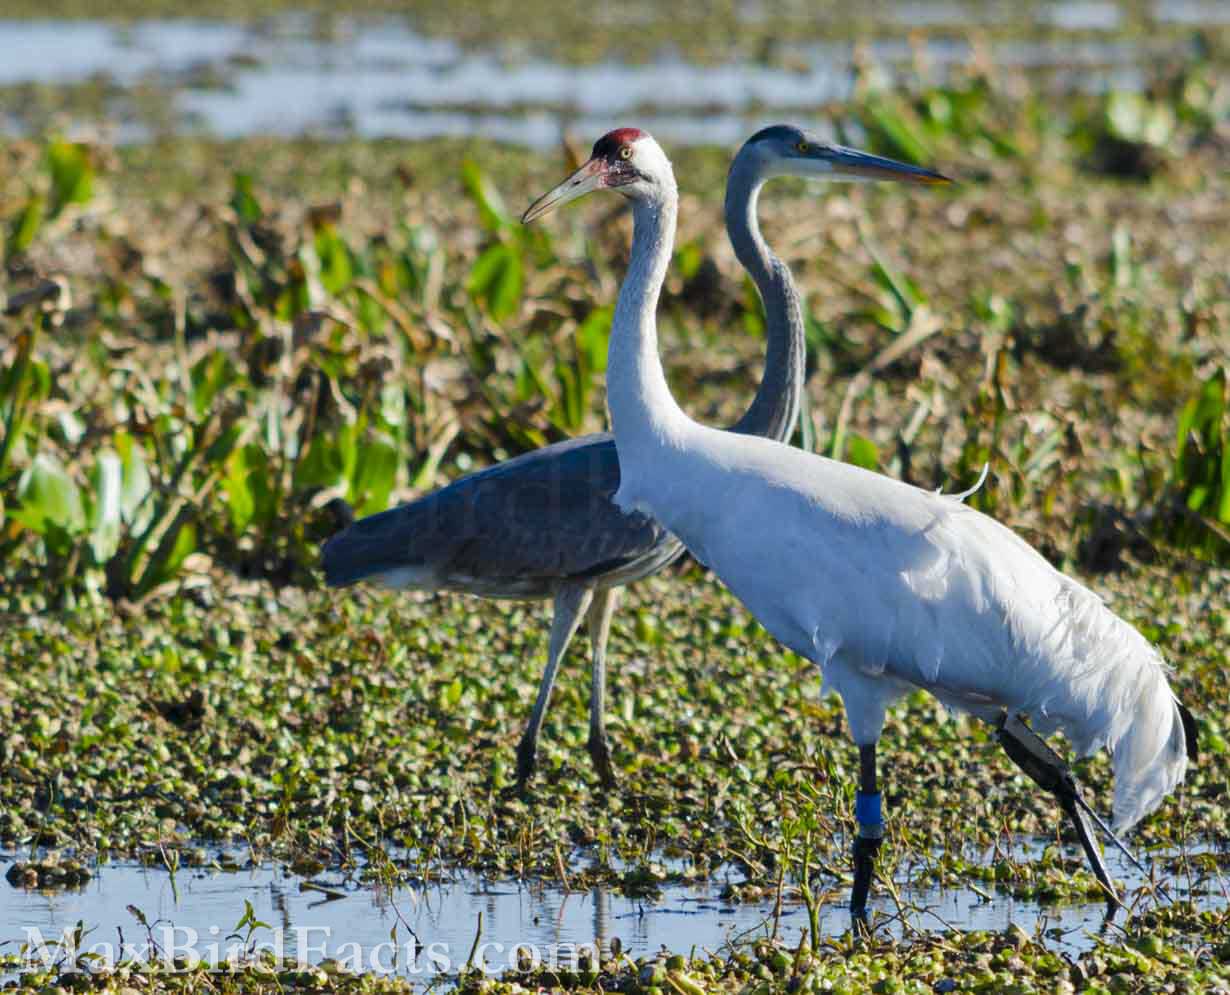 My first view of a Whooping Crane was at Paynes Prairie Preserve State Park in 2013. I knew this bird was special because of the attention from the other people and the radio transmitter on its leg. Thankfully, I took several photos of this majestic crane and reported it to the International Crane Foundation. (Gainesville, FL. 2013)